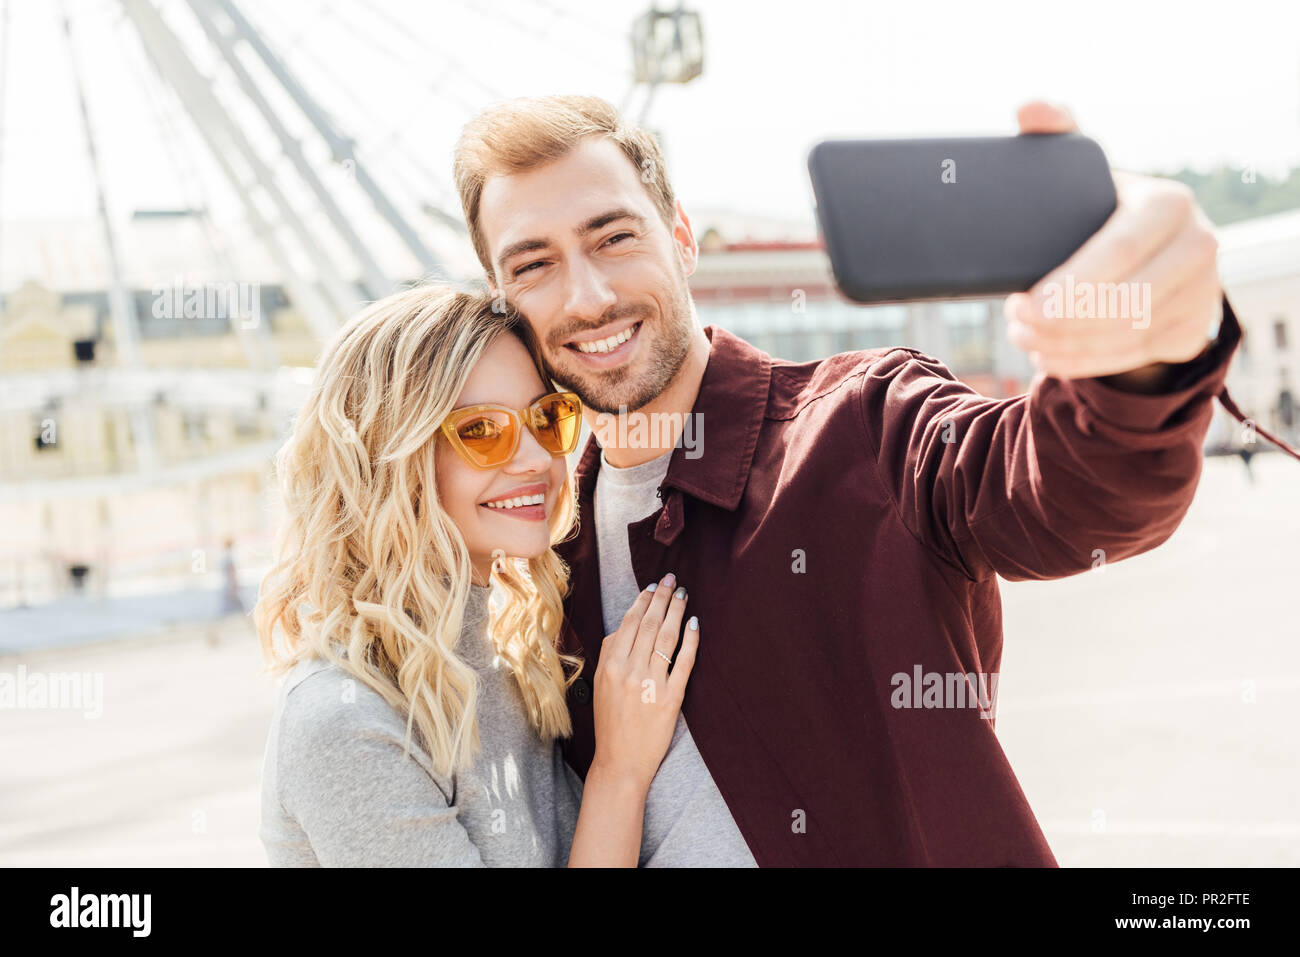 smiling couple in autumn outfit taking selfie with smartphone in city Stock Photo